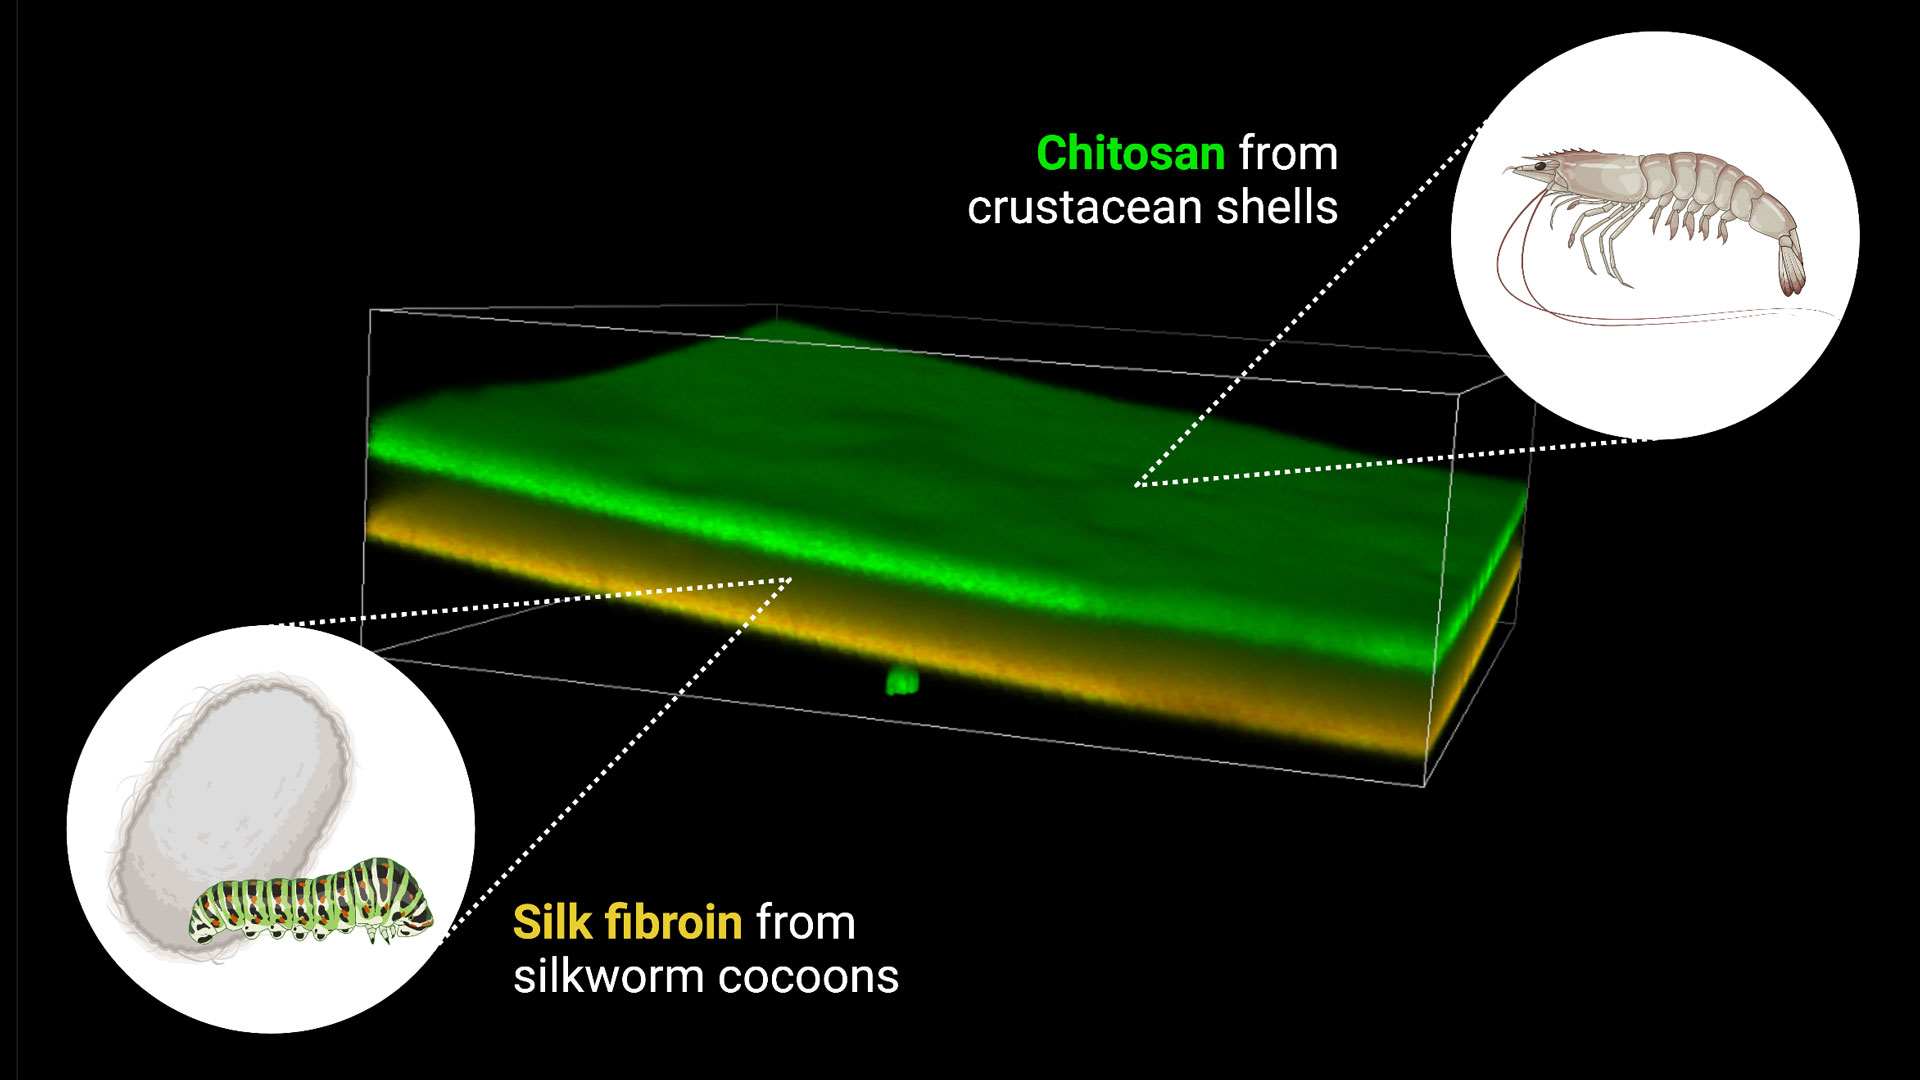 graphic showing two layers: Silk fibroin from silkworm cocoons (orange, bottom layer) and Chitosan from crustacean shells (green, top layer)